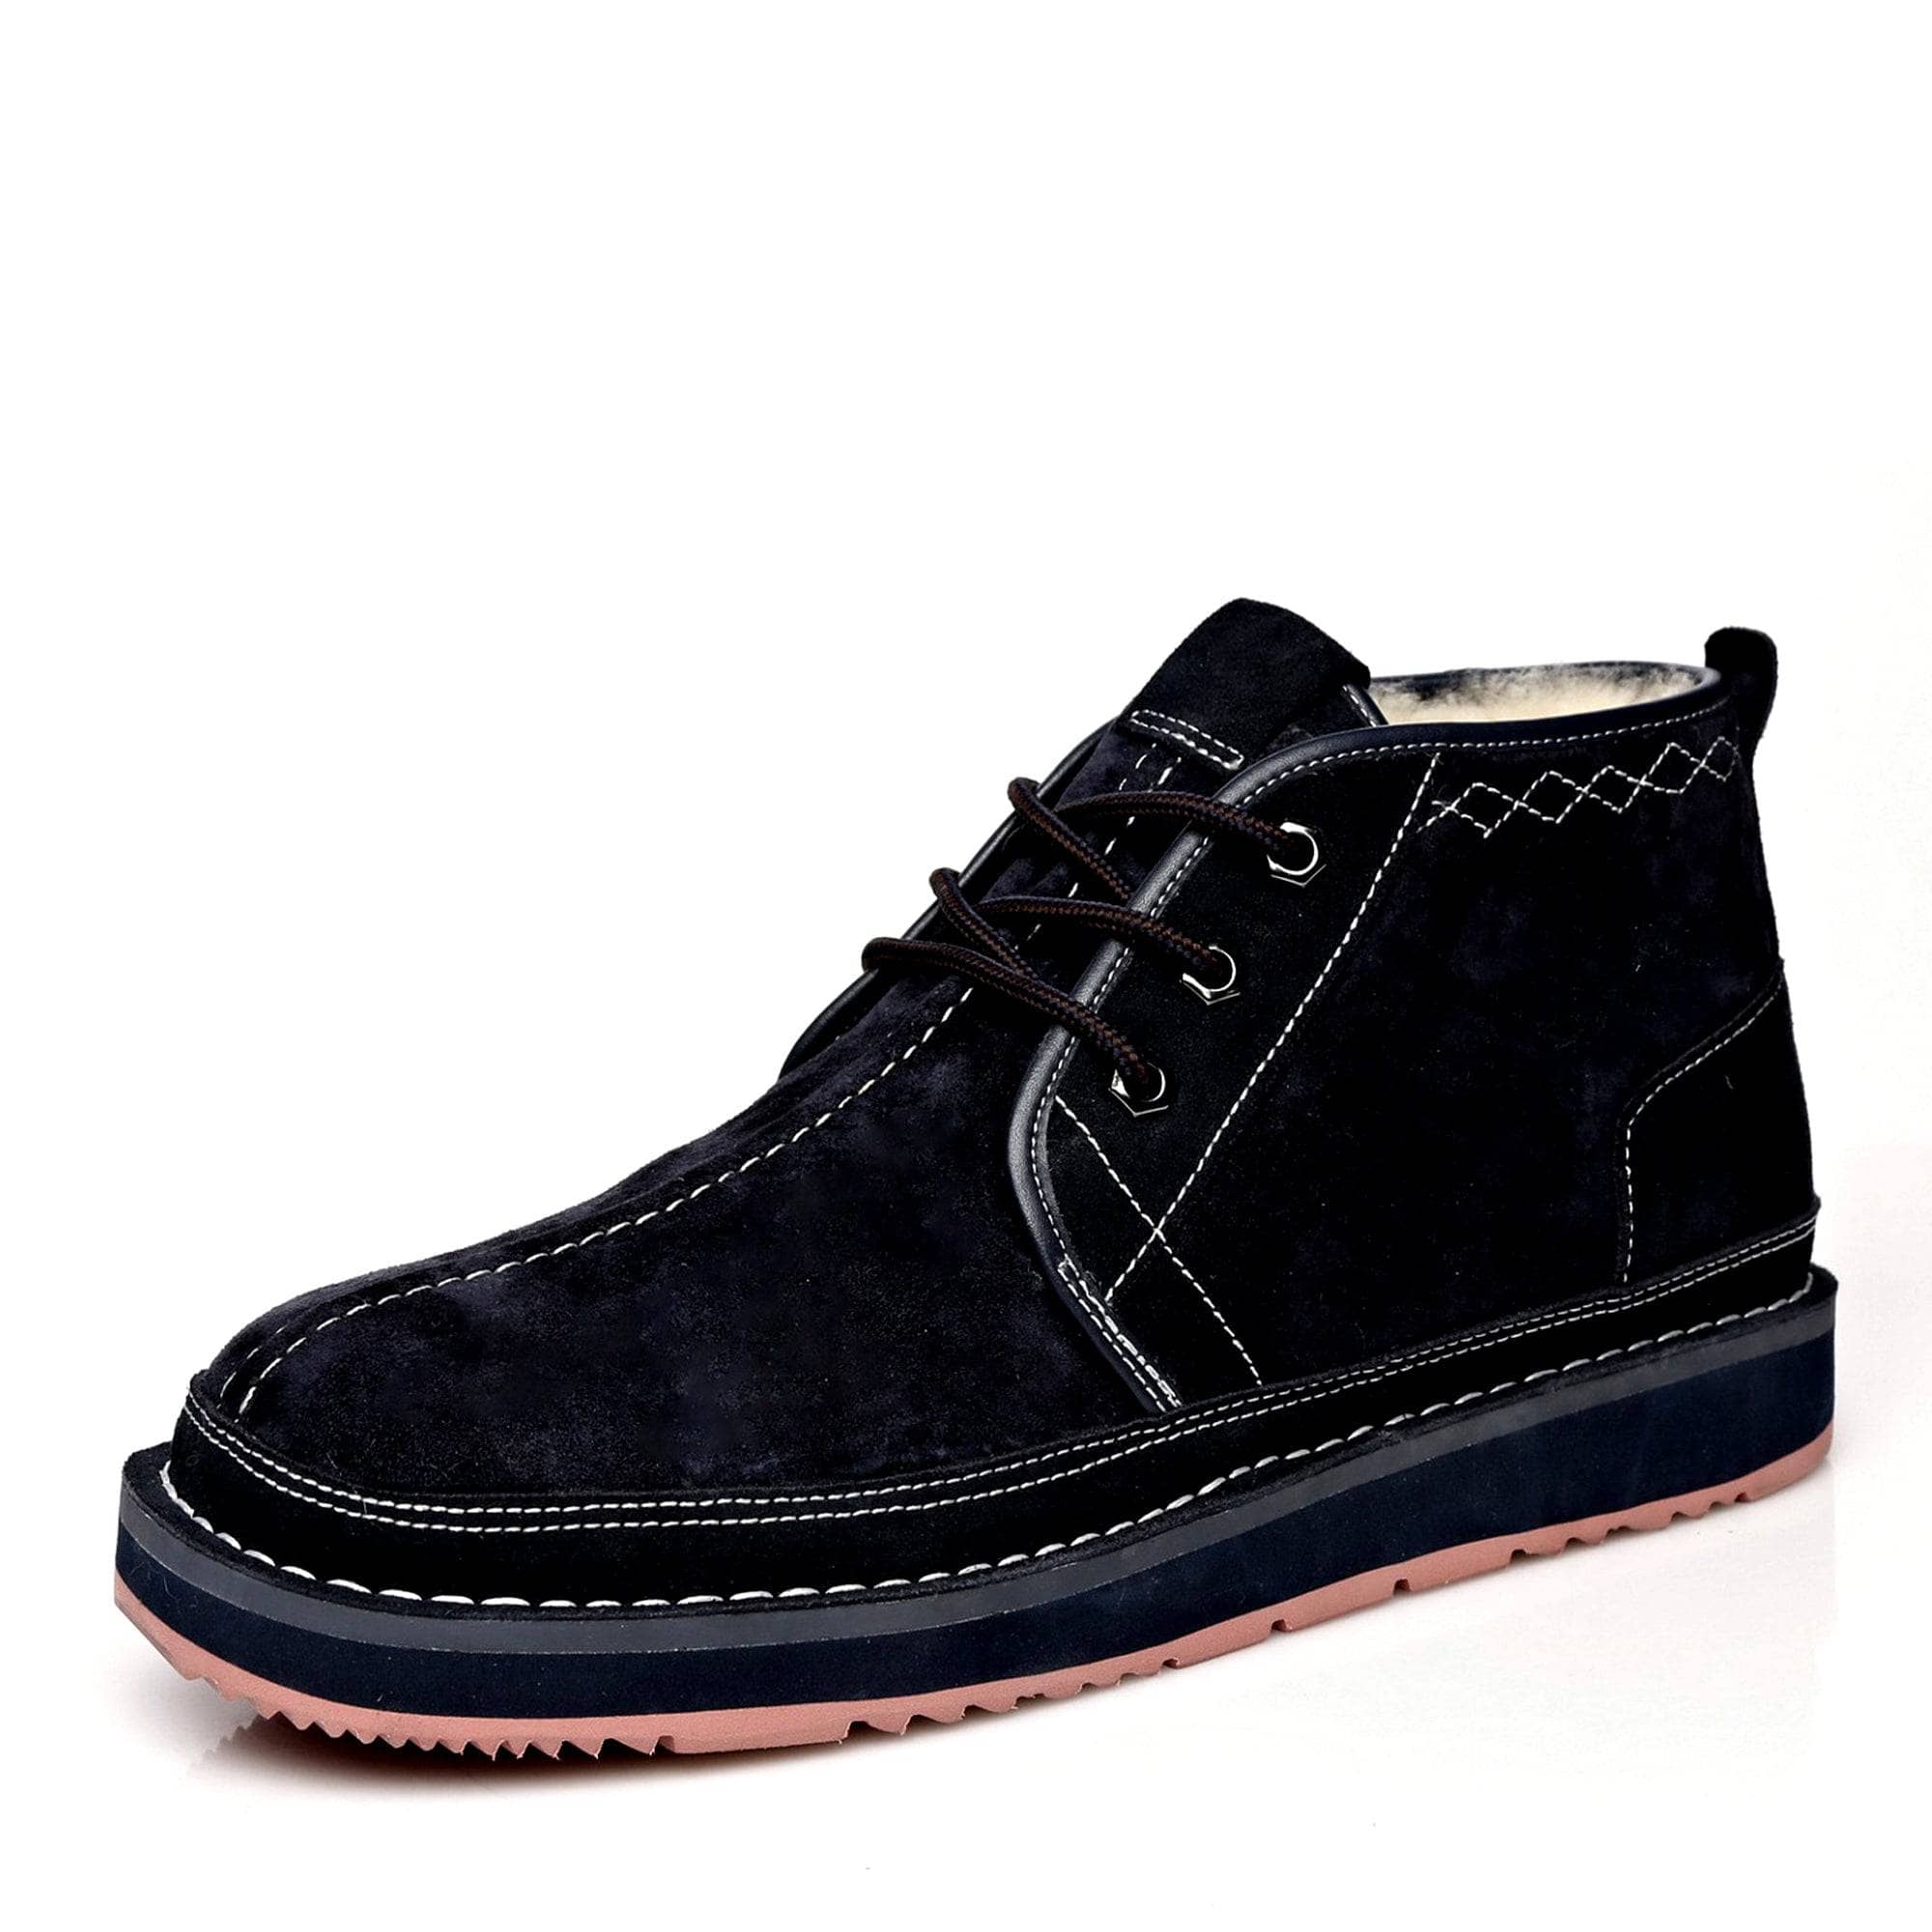 UGG Casual Men’s Lace-up Ankle Boots